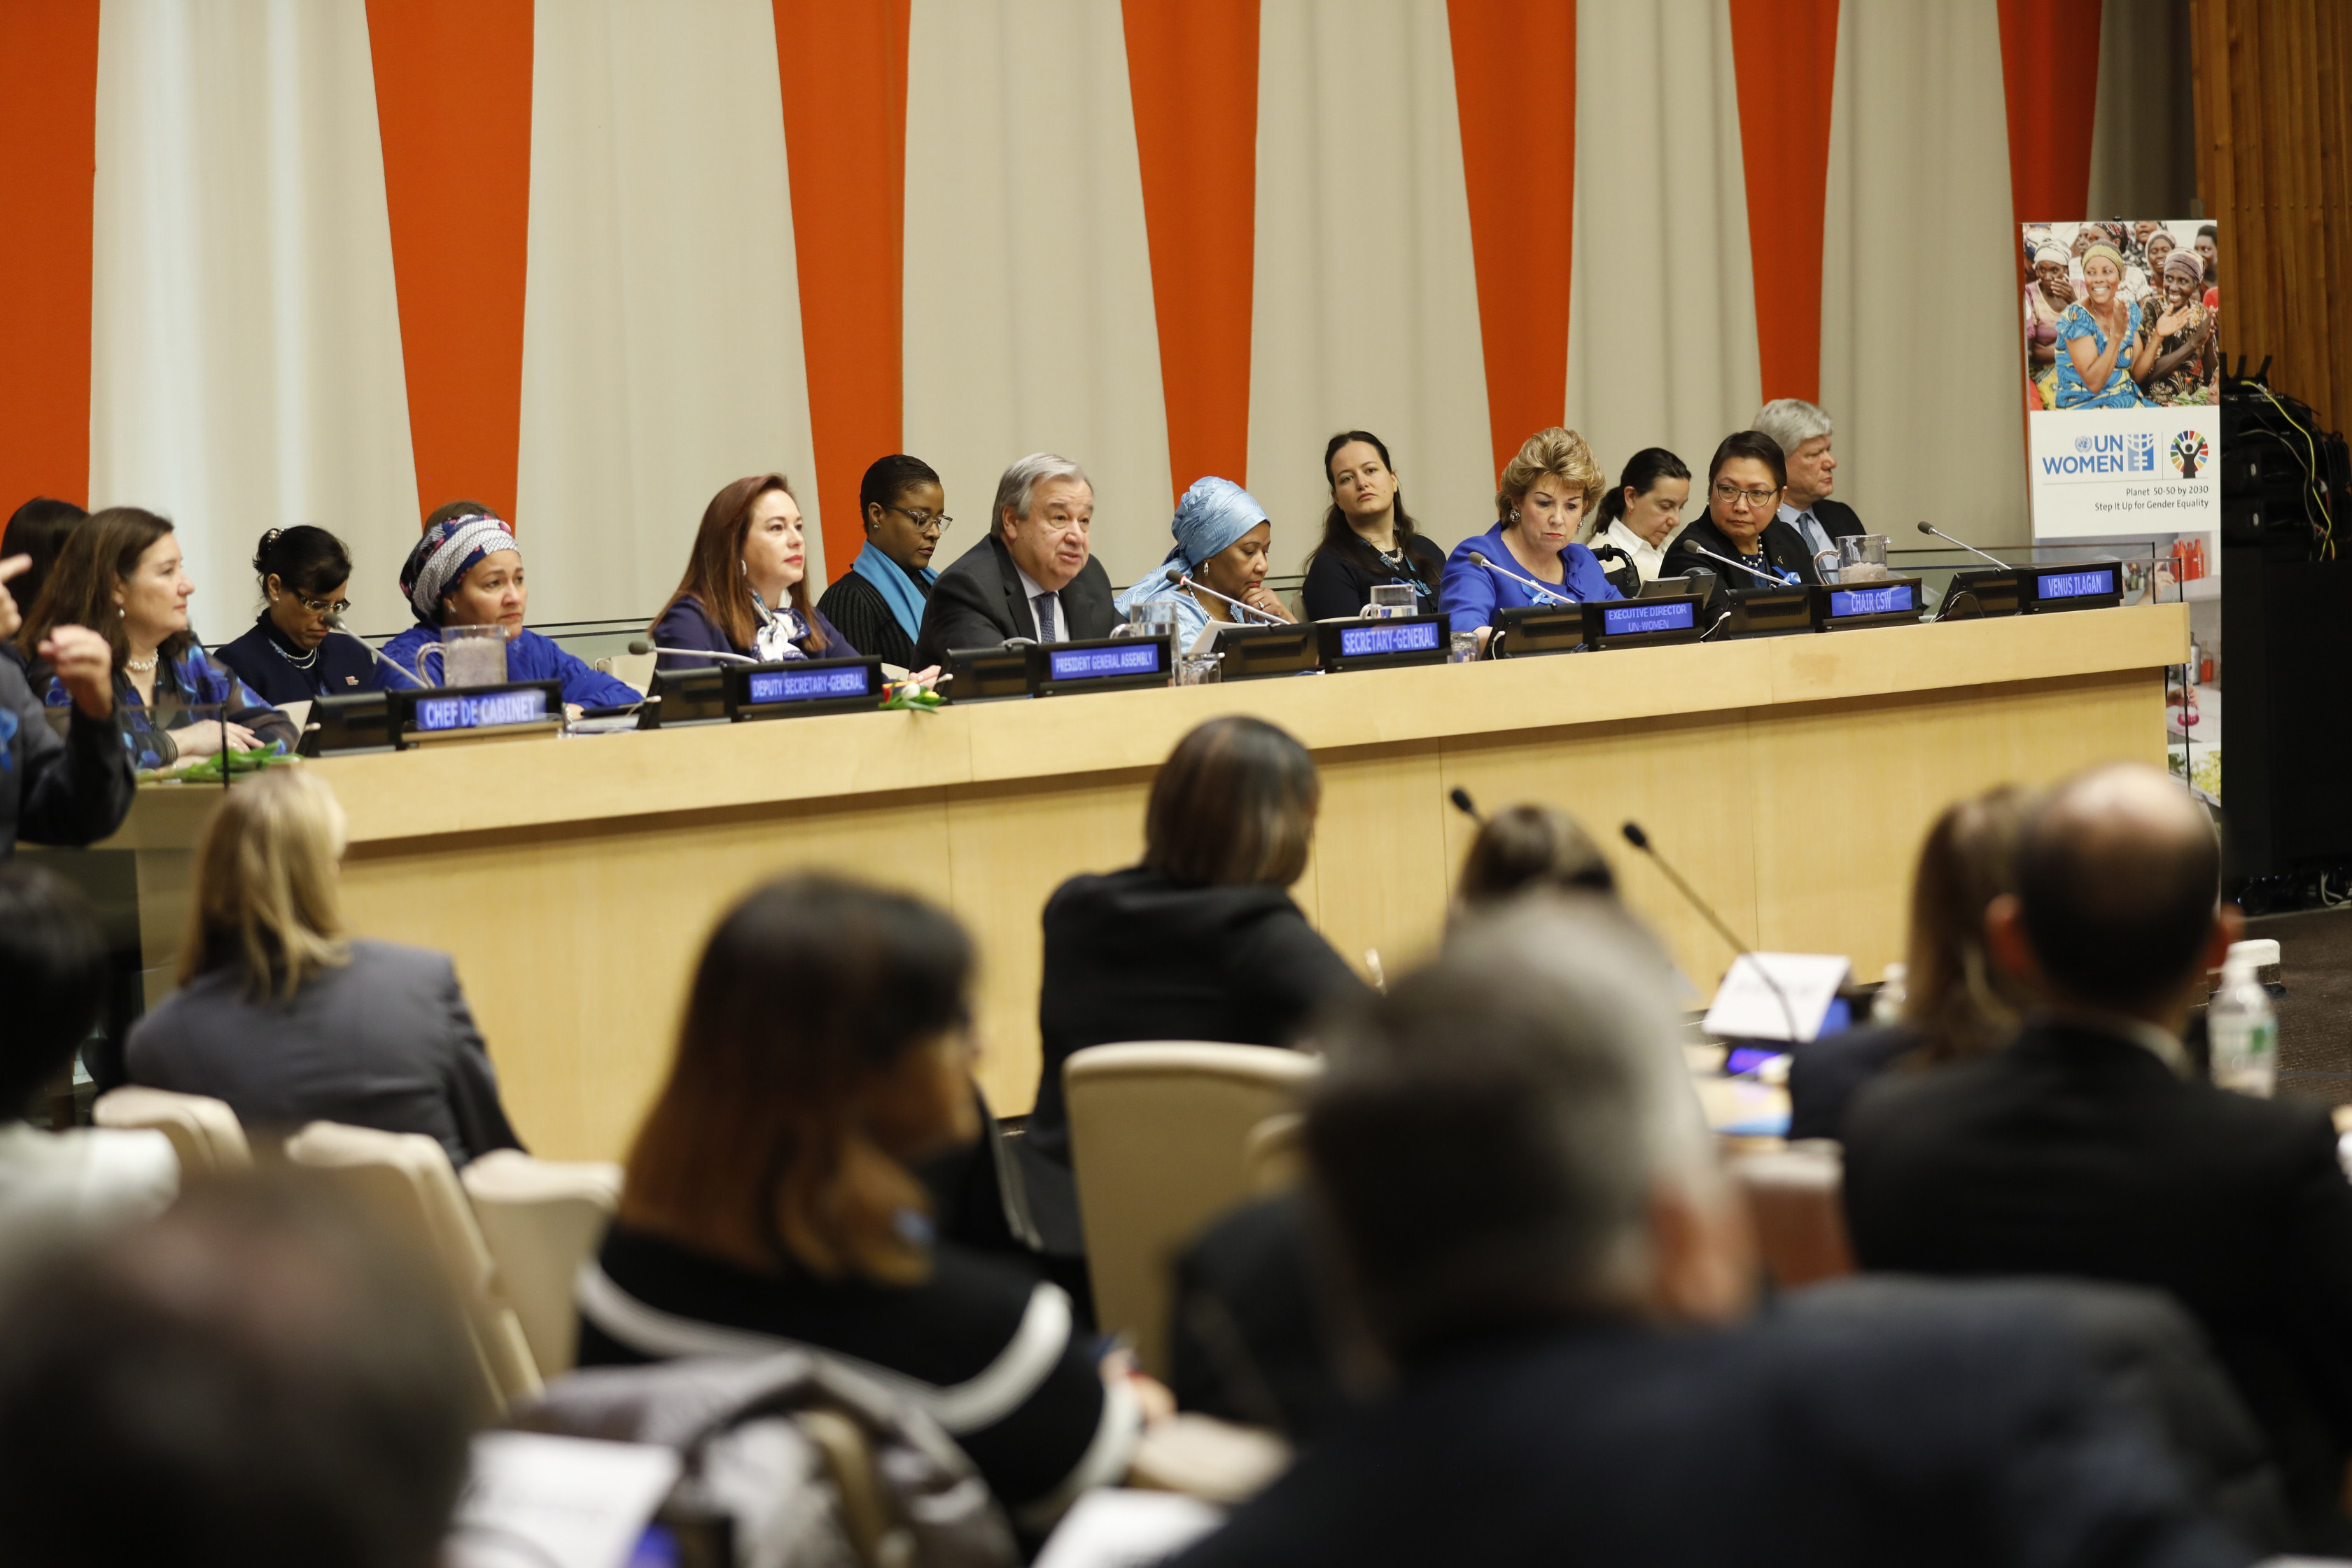 International Women's Day is commemorated at United Nations Headquarters in New York. Photo: UN Women/Ryan Brown